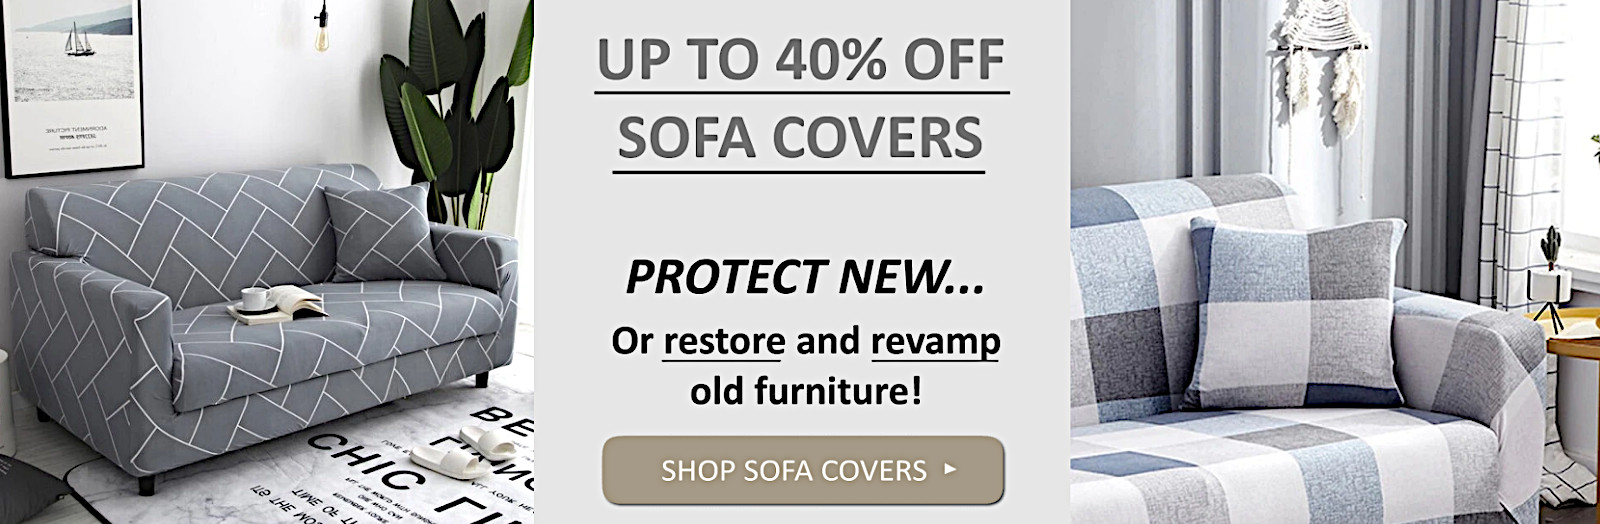 Affordable Price sofa covers